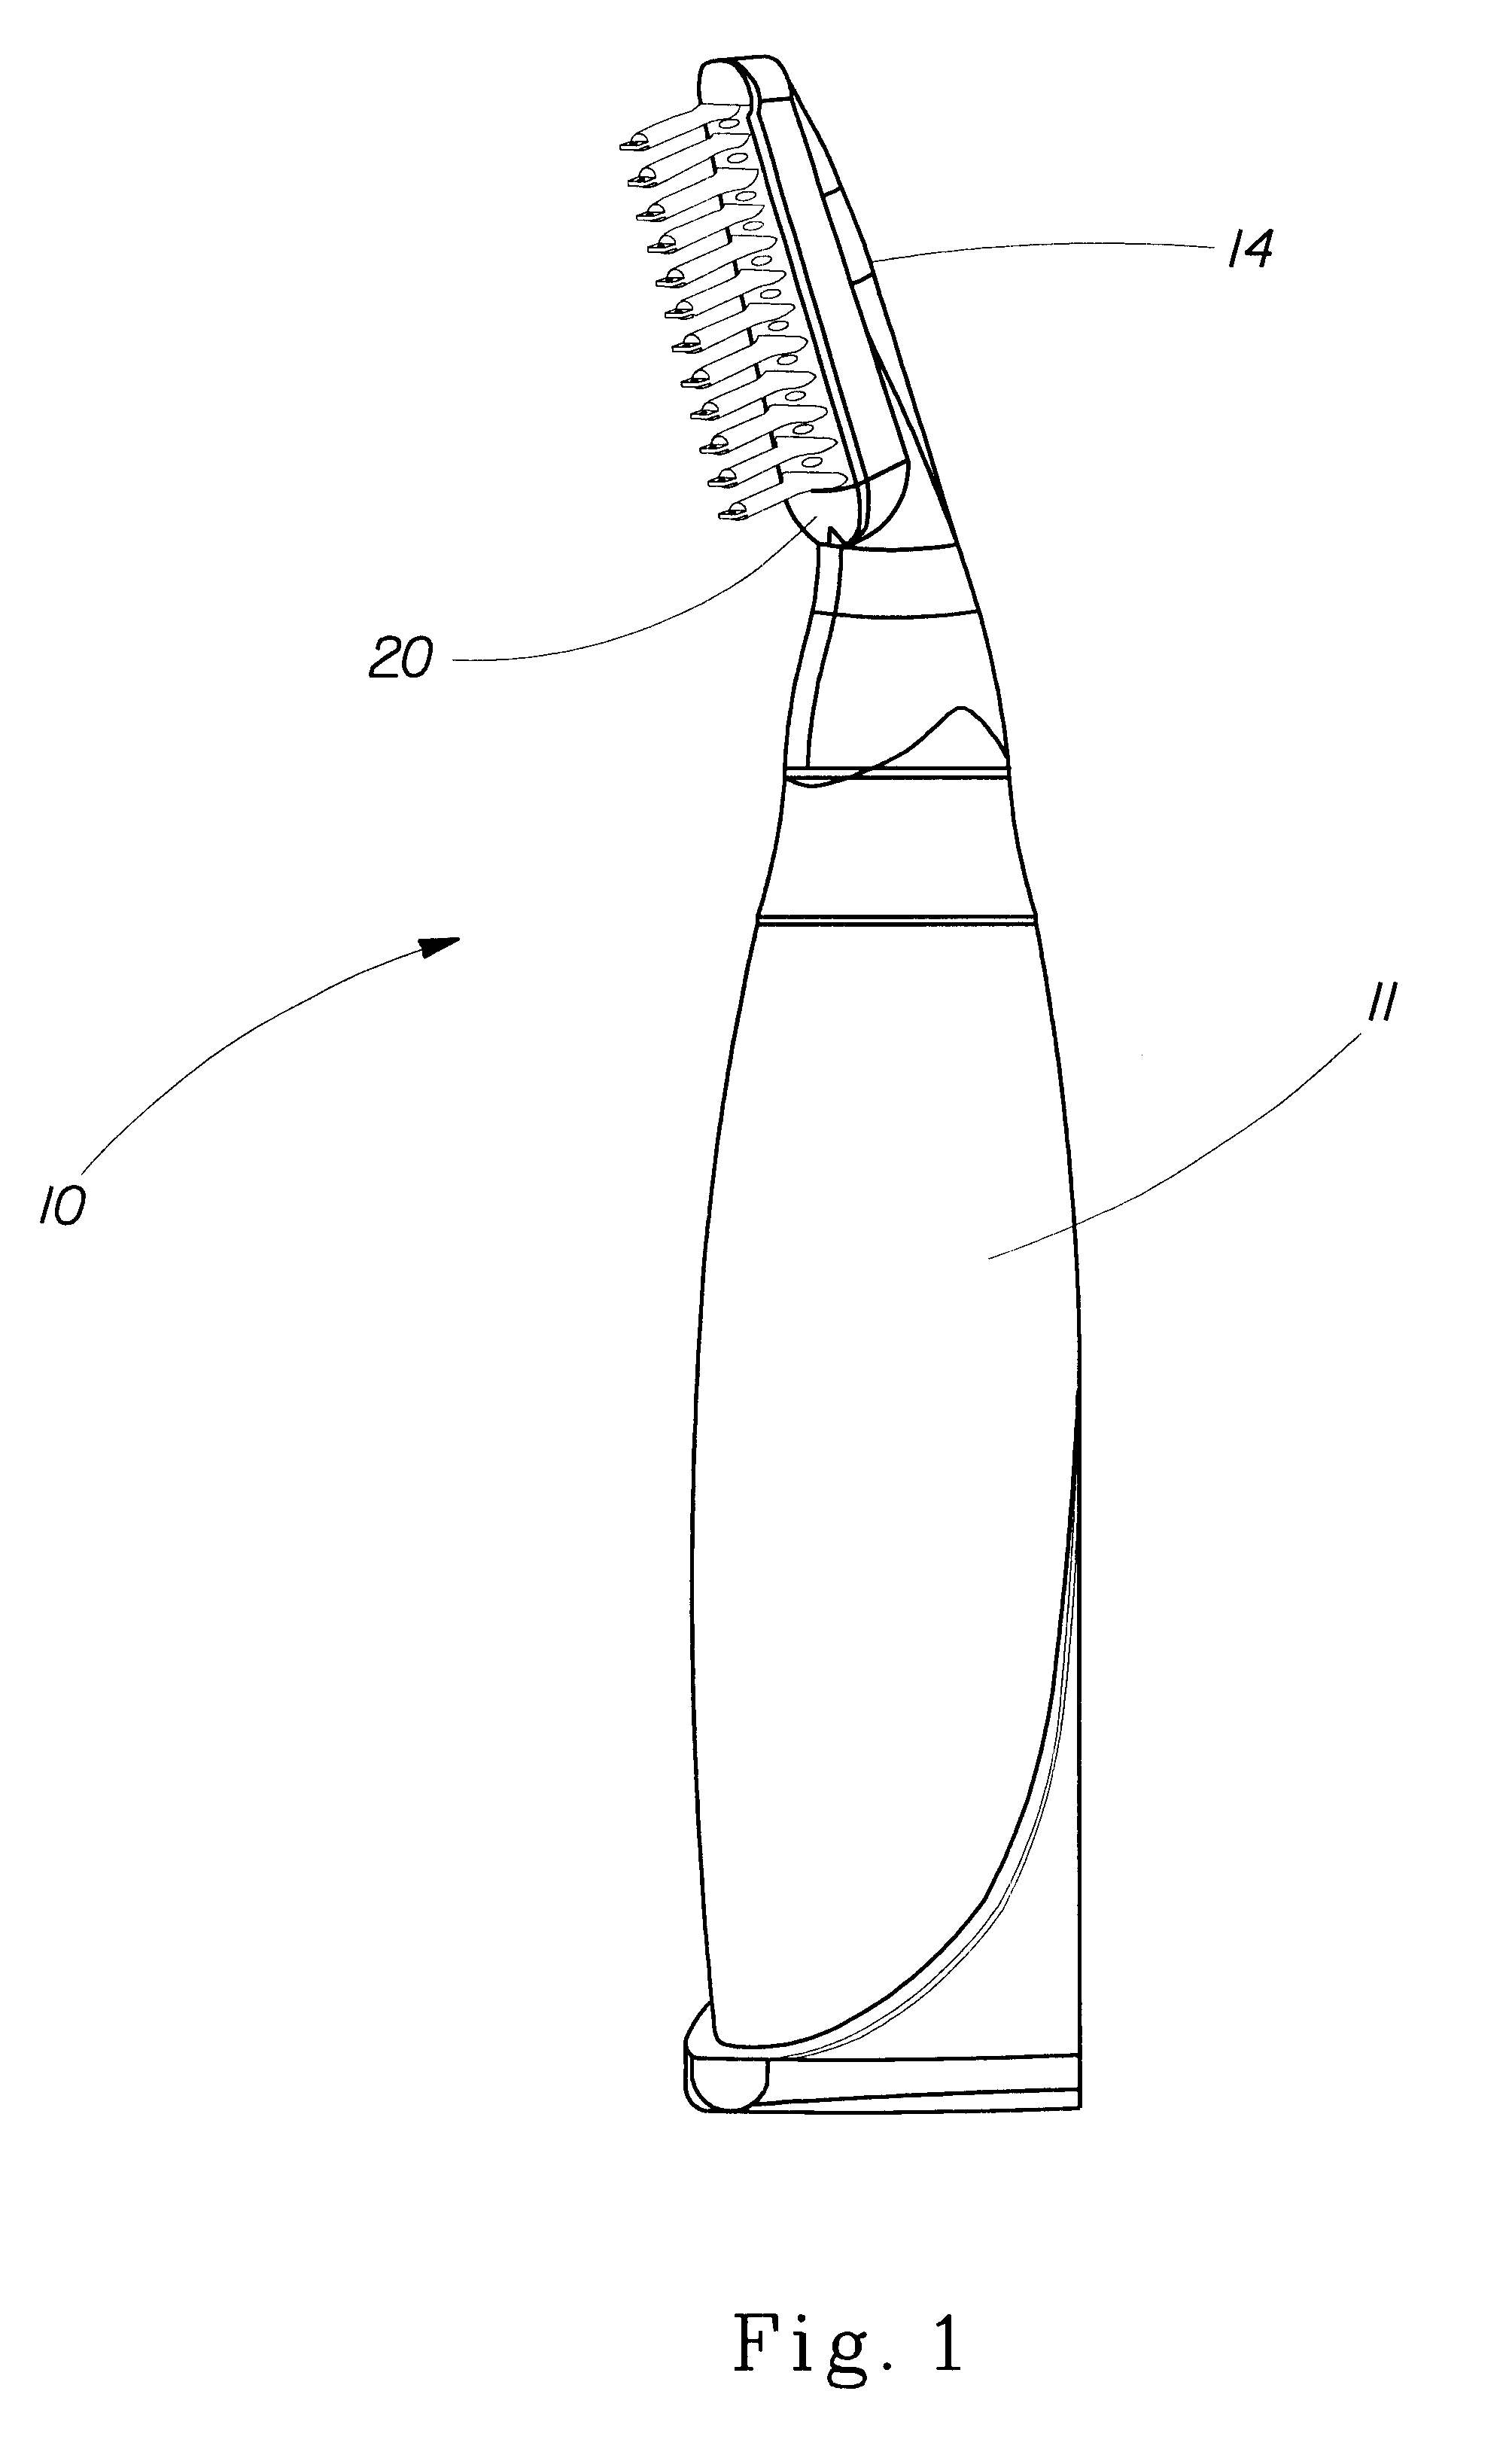 Applicator for applying liquid products to hair